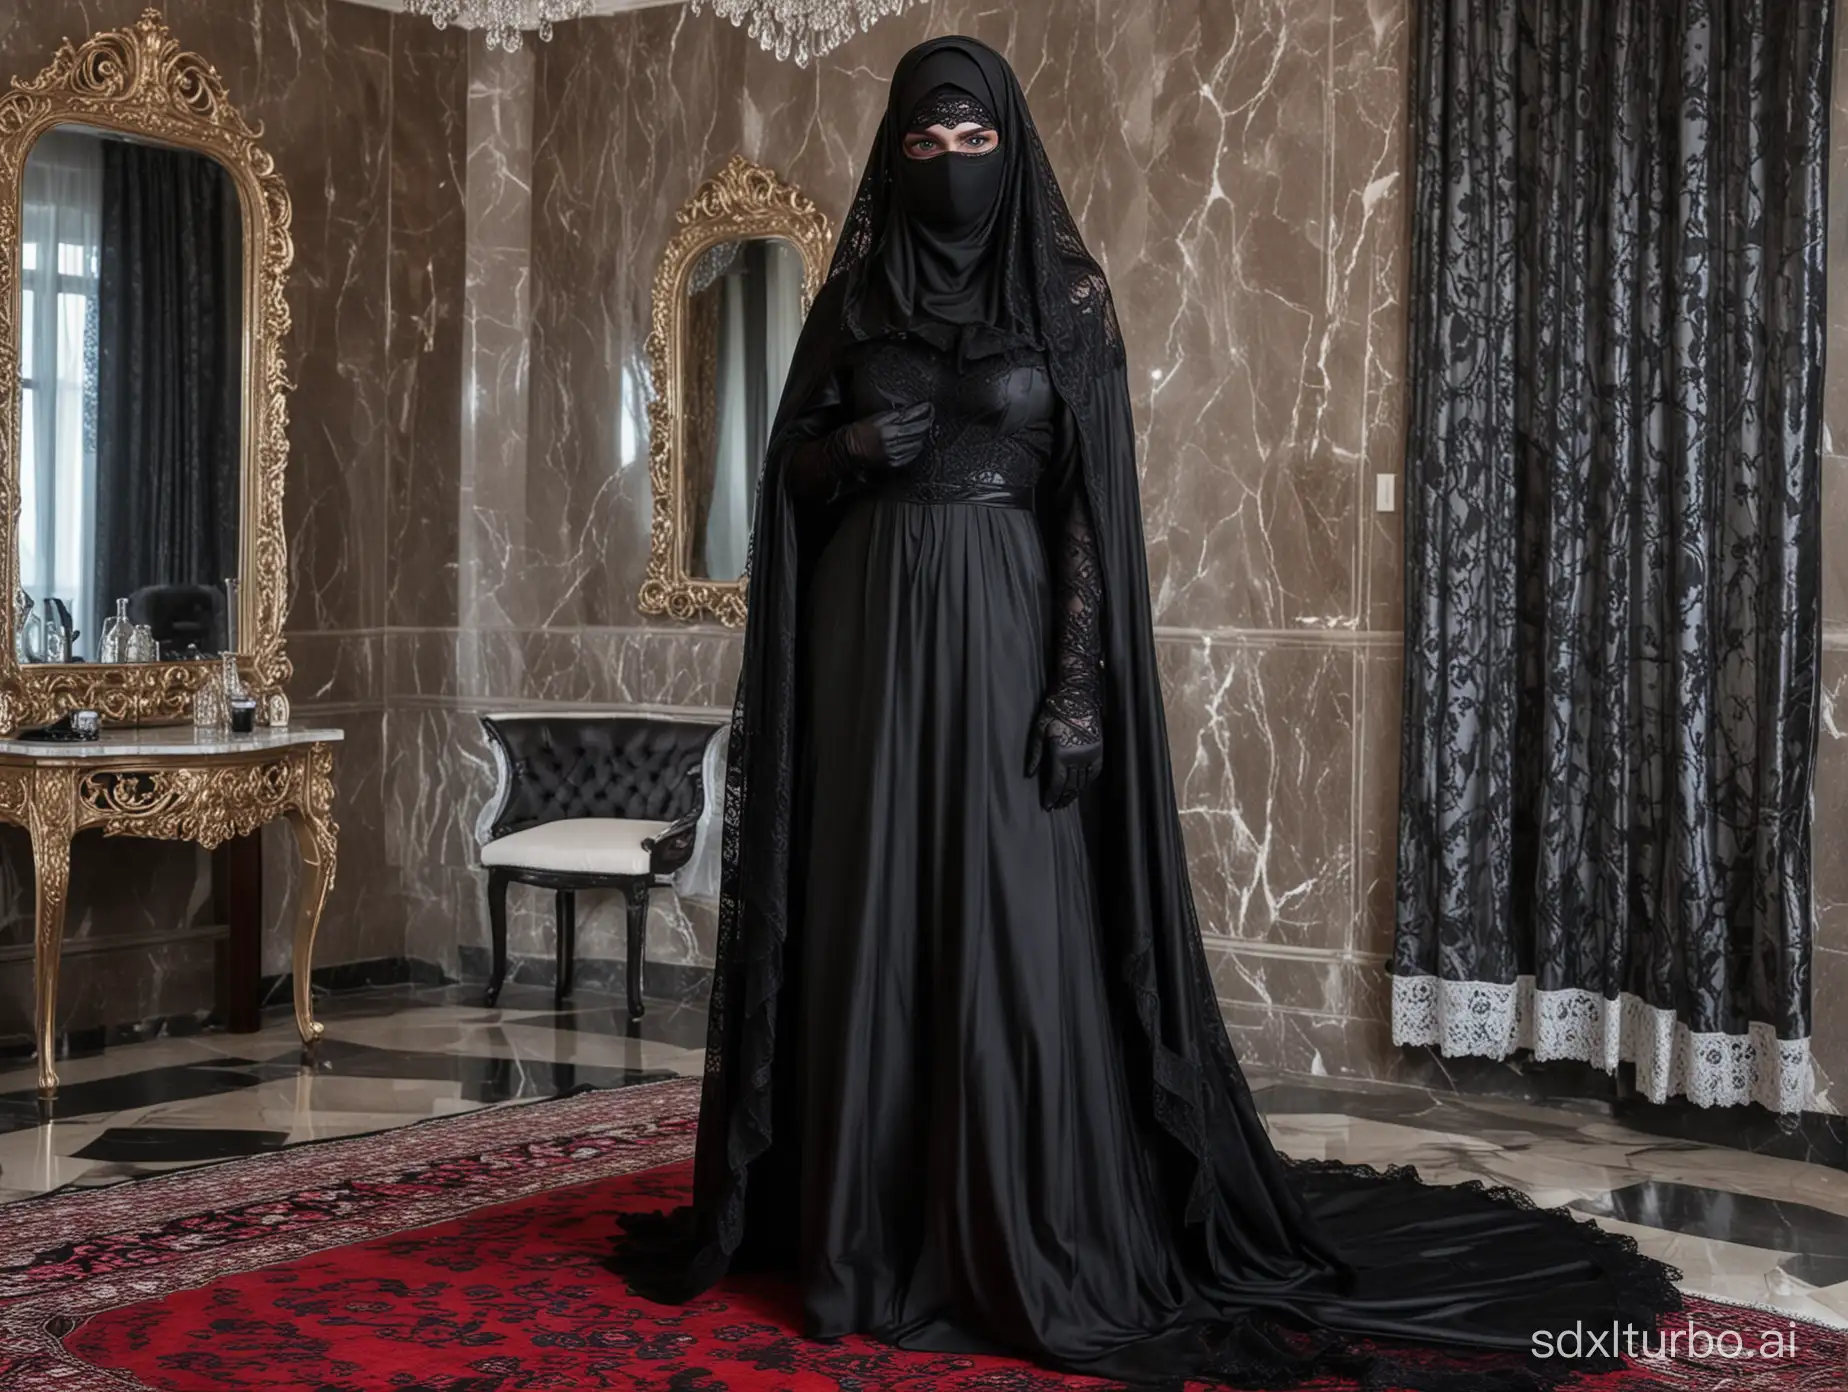 Sissy standing, constrained, blue eyes, fully black burka. head covered, mask on mouth, head covered with a transparent lace veil, eyes masked. Black gloves. Black pumps. Luxury room, marble walls and red satin bed. Mirror in the background.
